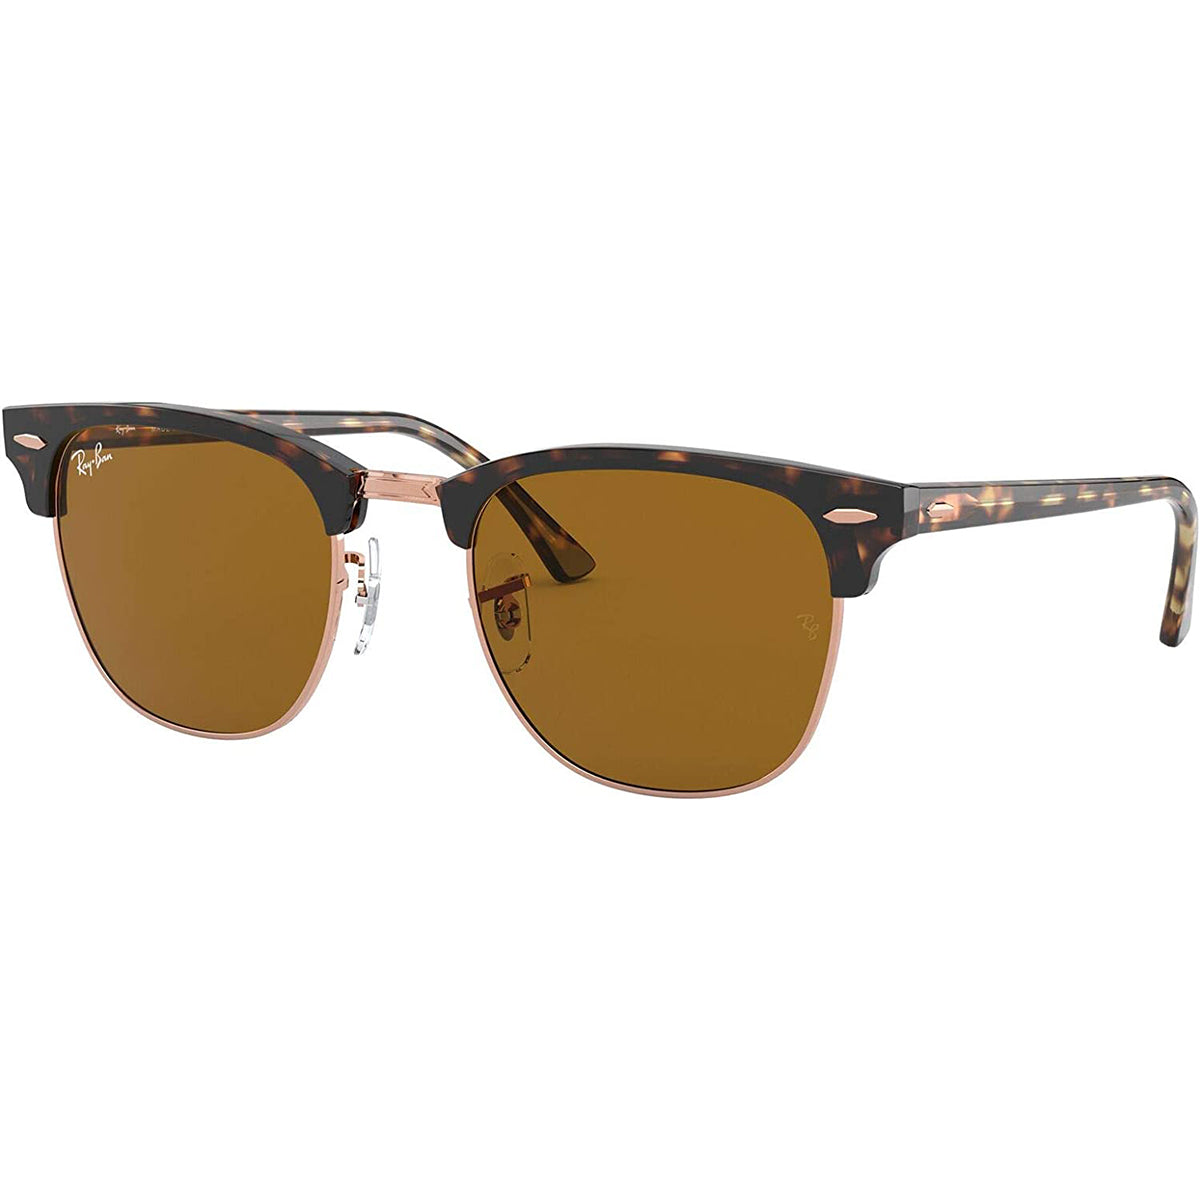 Ray-Ban Clubmaster Classic Adult Lifestyle Sunglasses-0RB3016